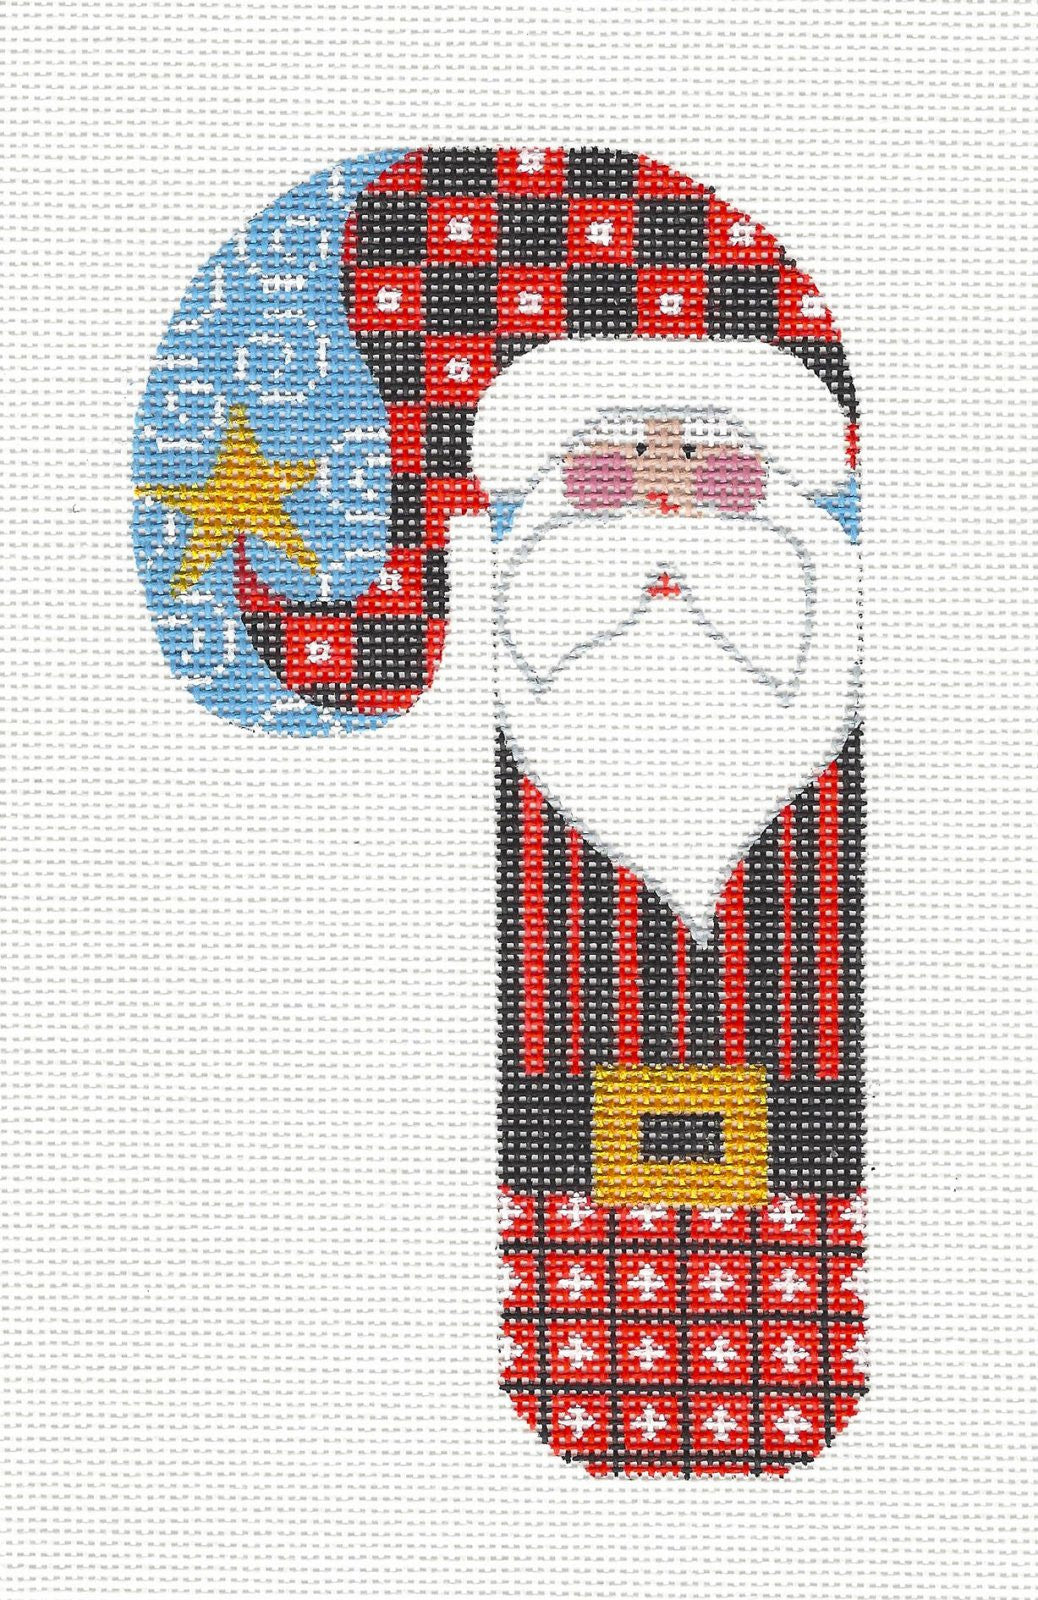 Large Candy Cane ~ Checked Santa Ornament on hand painted Needlepoint Canvas by Danji Designs